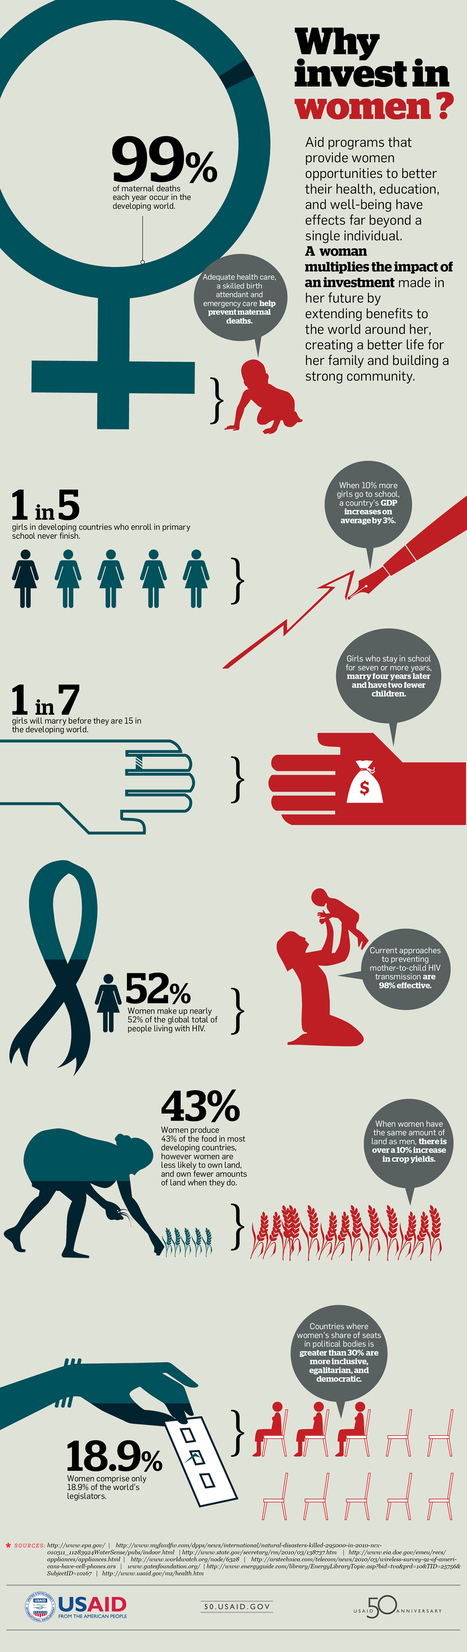 Why invest in women? Infographic | Soup for thought | Scoop.it